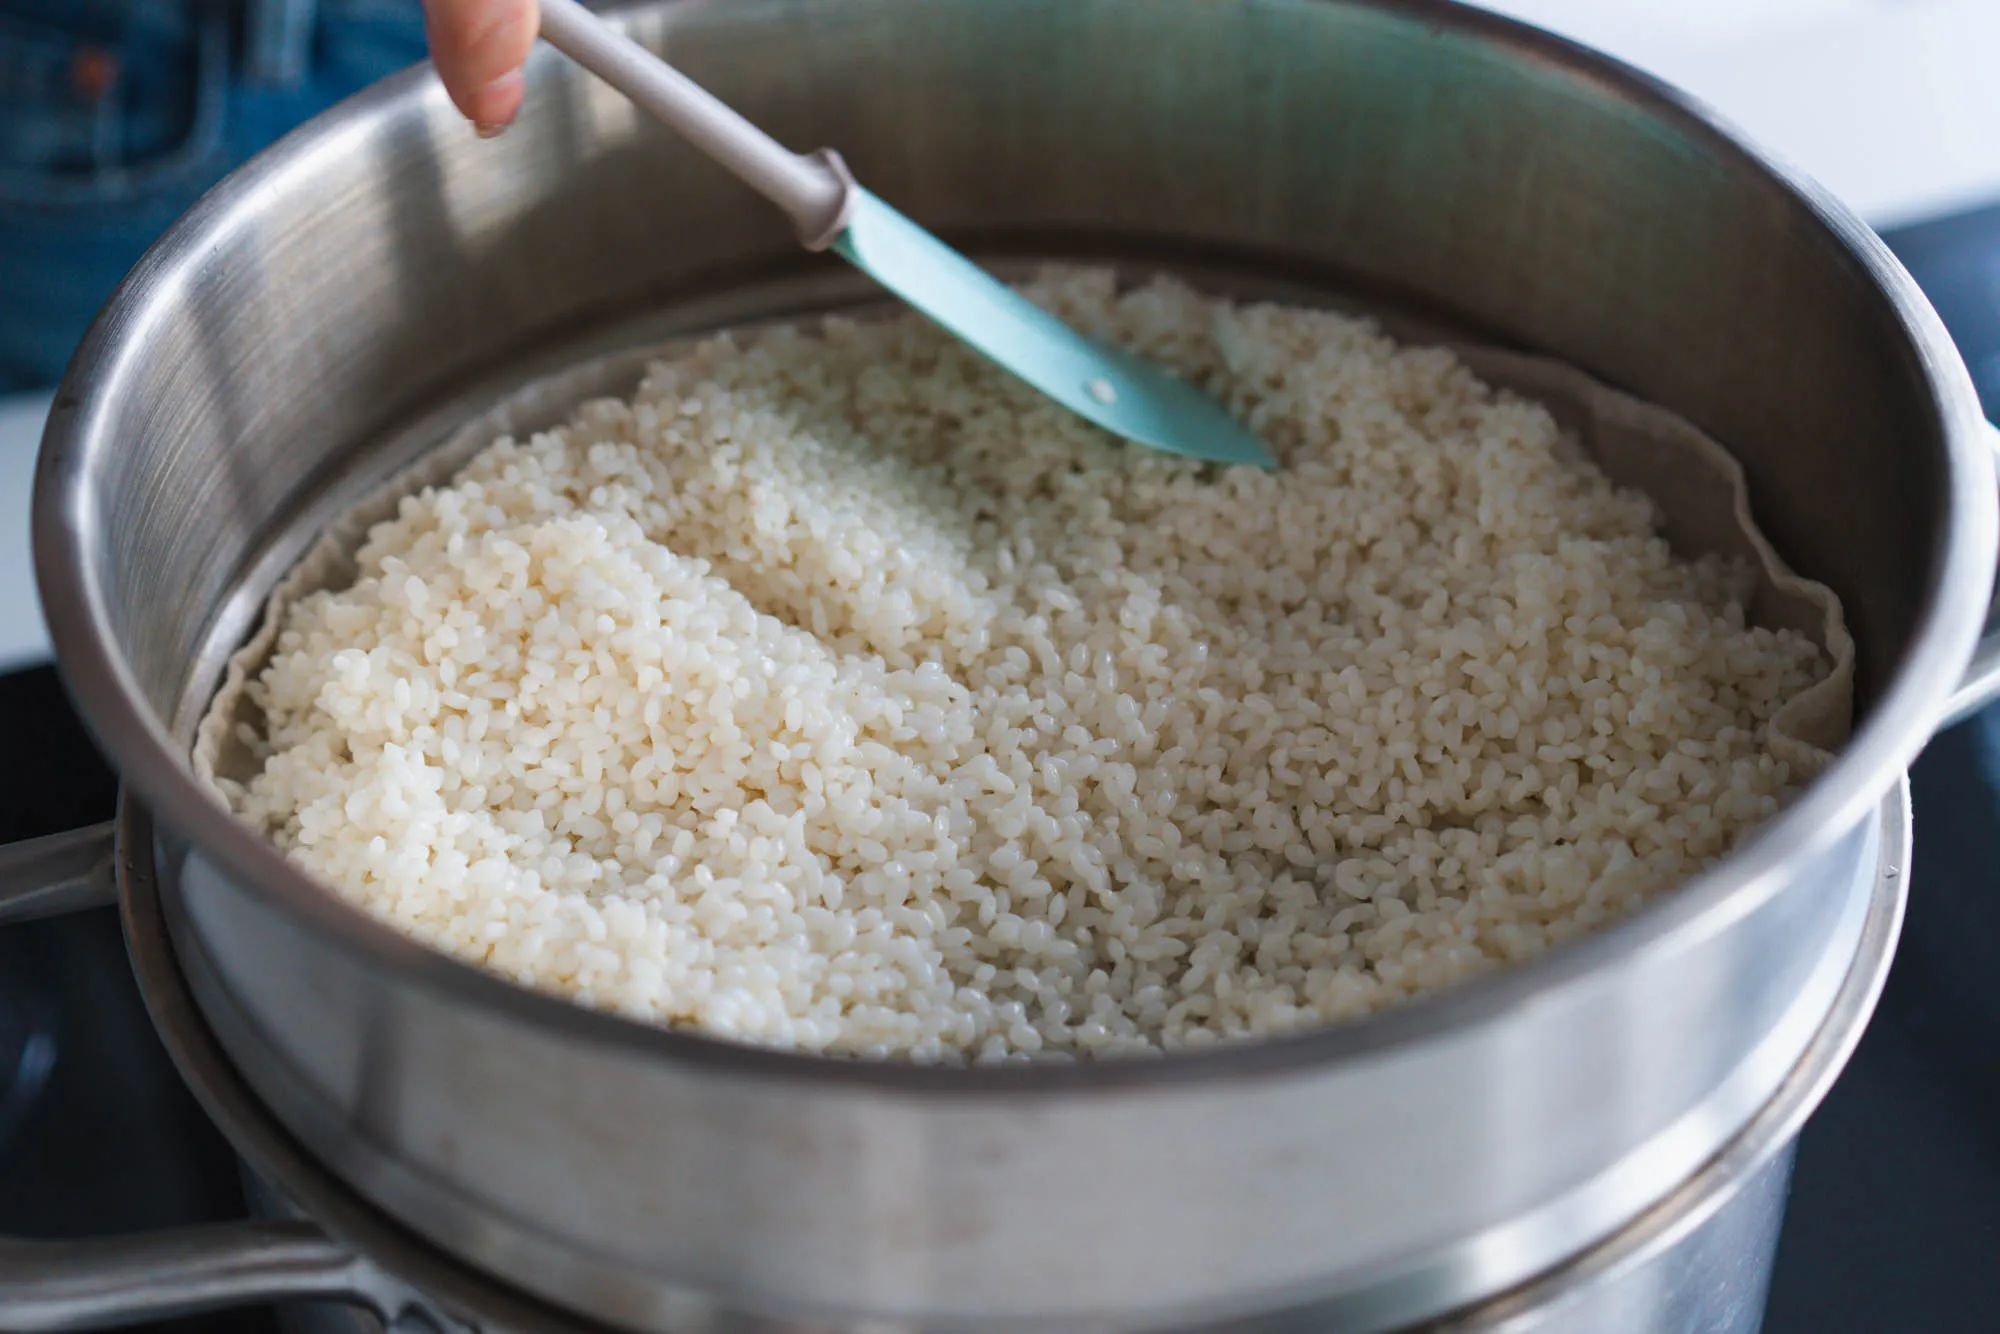 how to make steamed sticky rice|chinasichuanfood.com